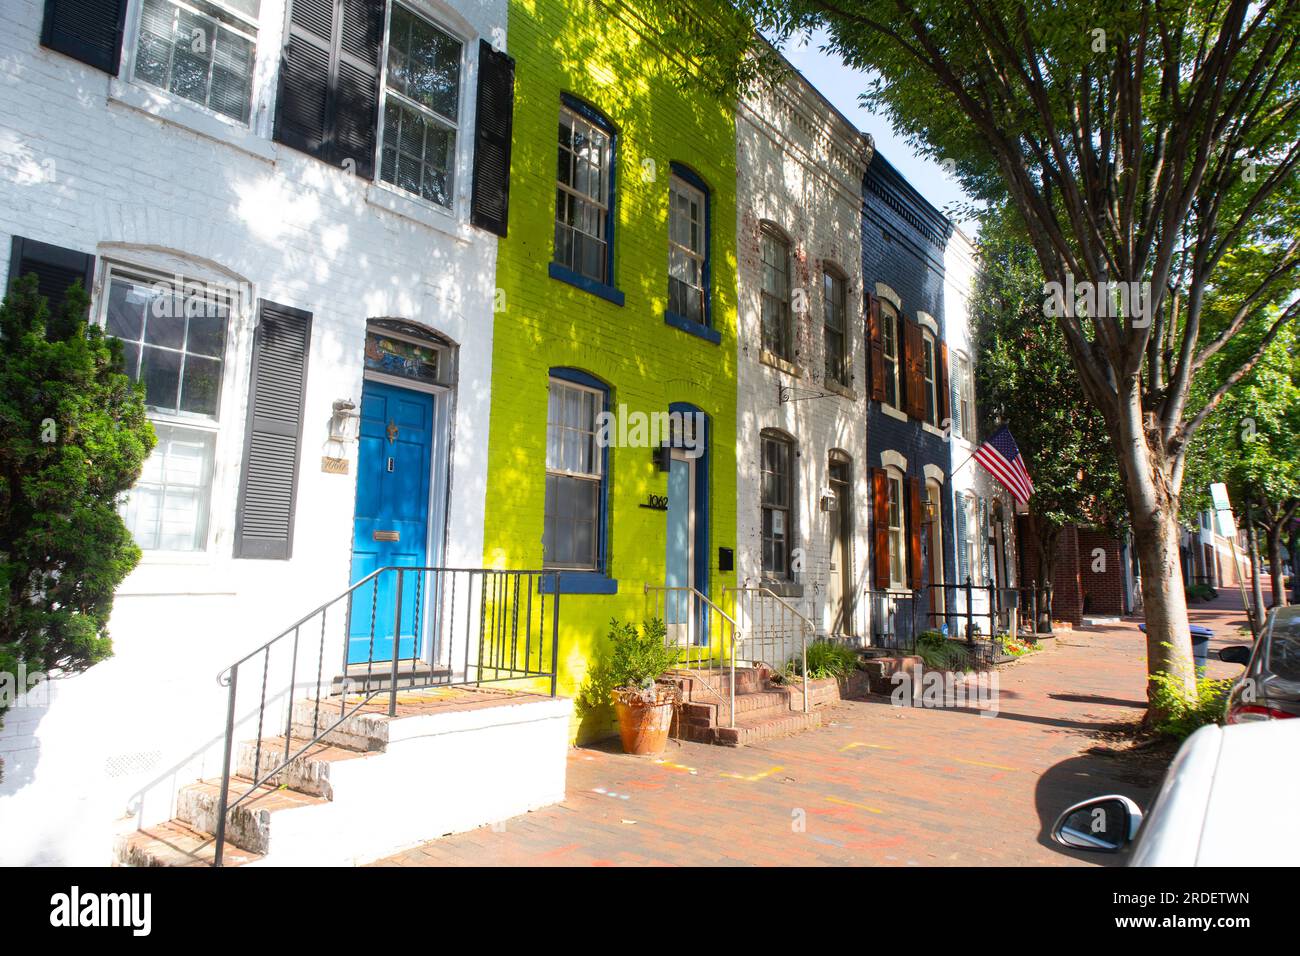 Case colorate a Georgetown, Washington, USA Foto Stock